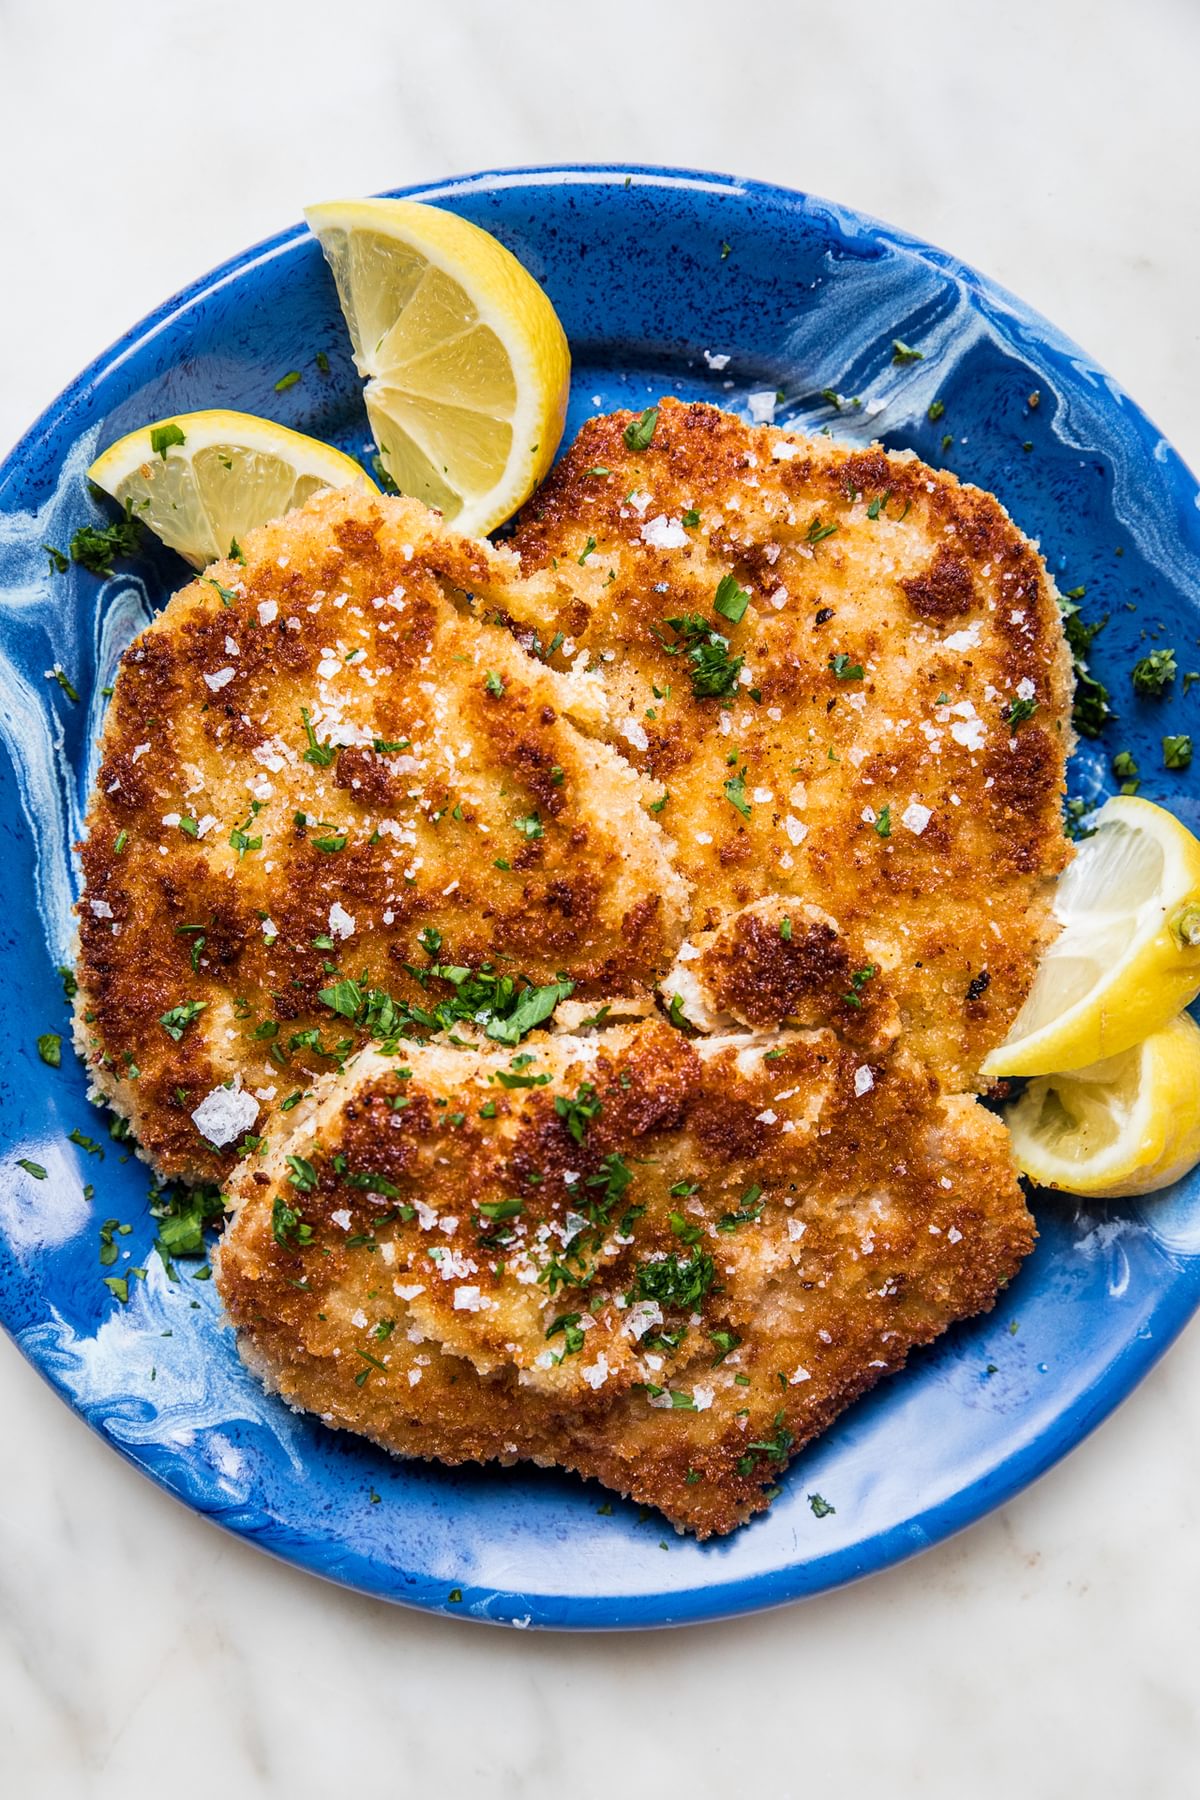 homemade pork schnitzel made with salt, pepper, flour, egg and plain breadcrumbs on a plate with lemon wedges for serving